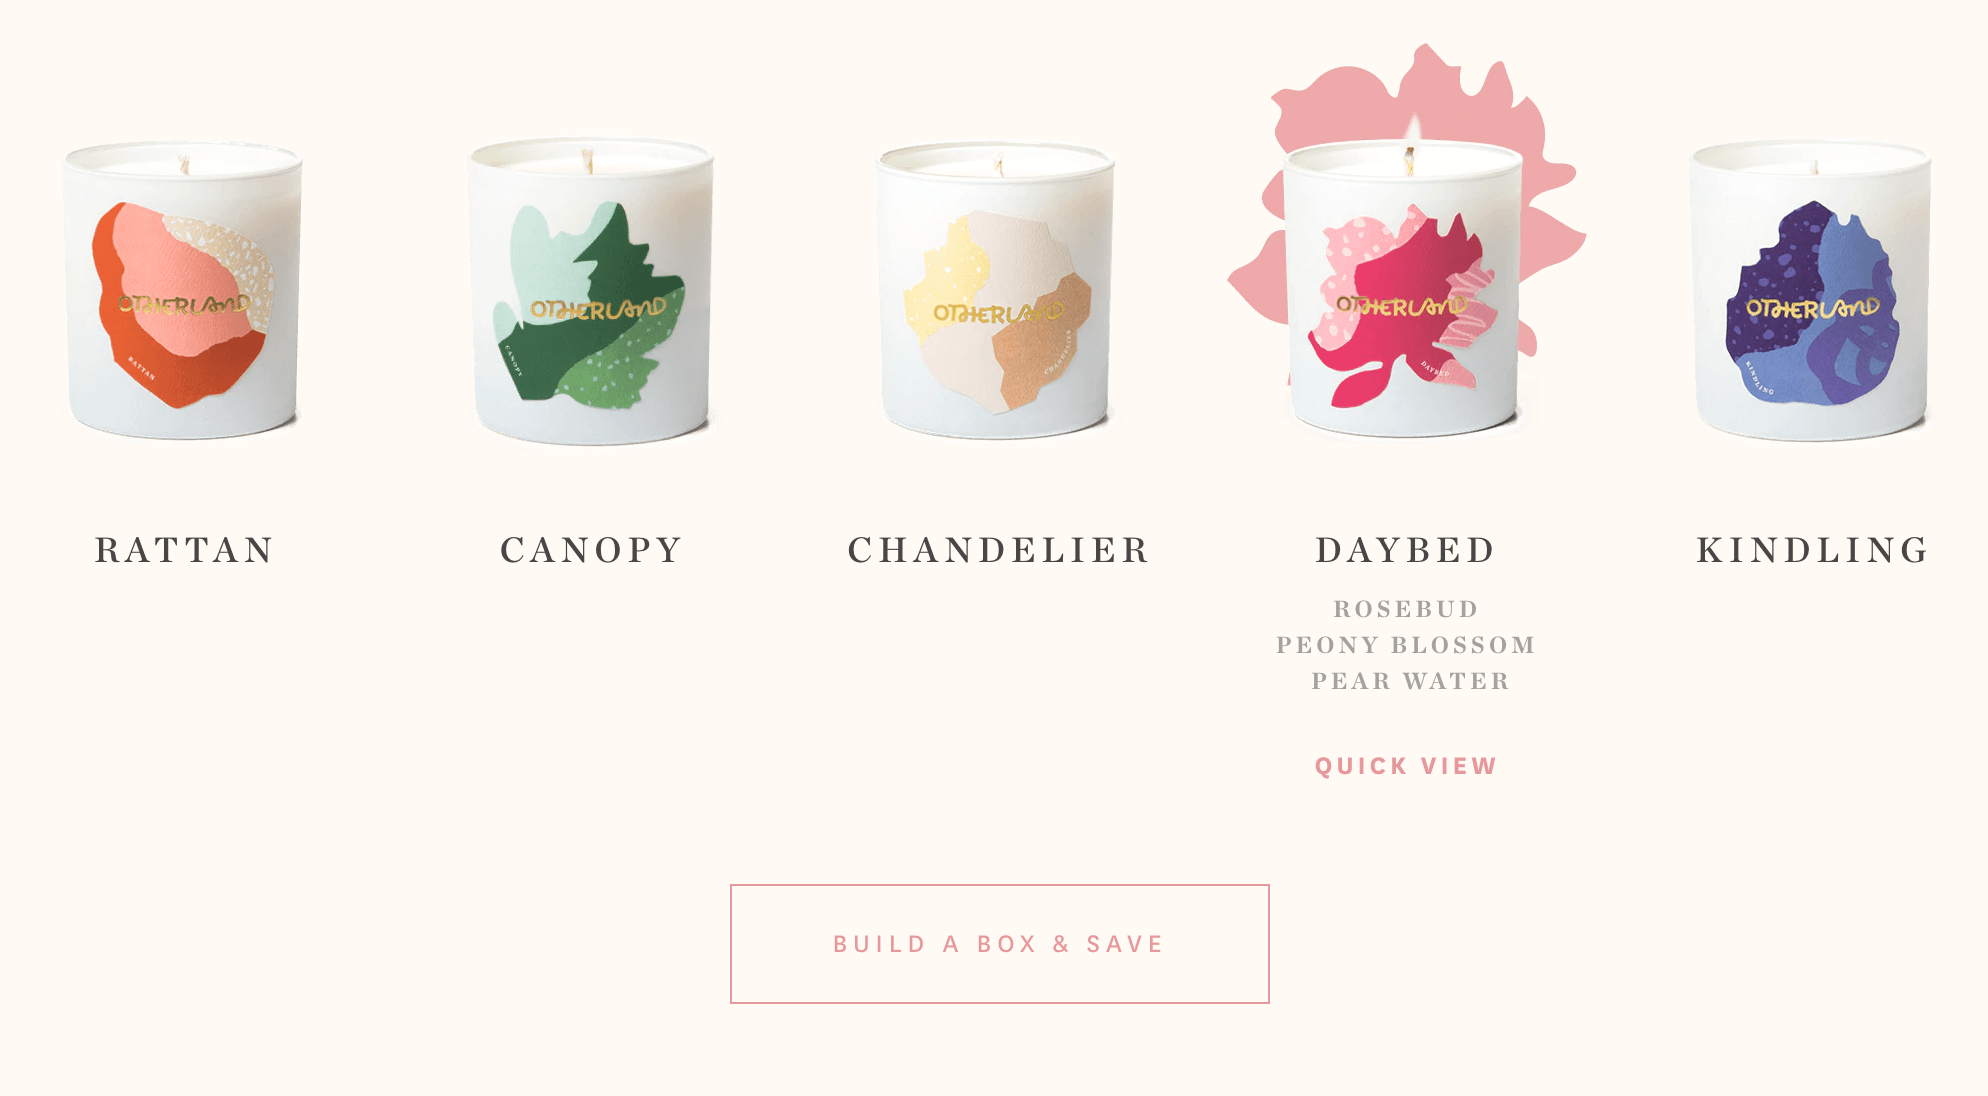 Five candles in jars with colorful, abstract illustrations. 